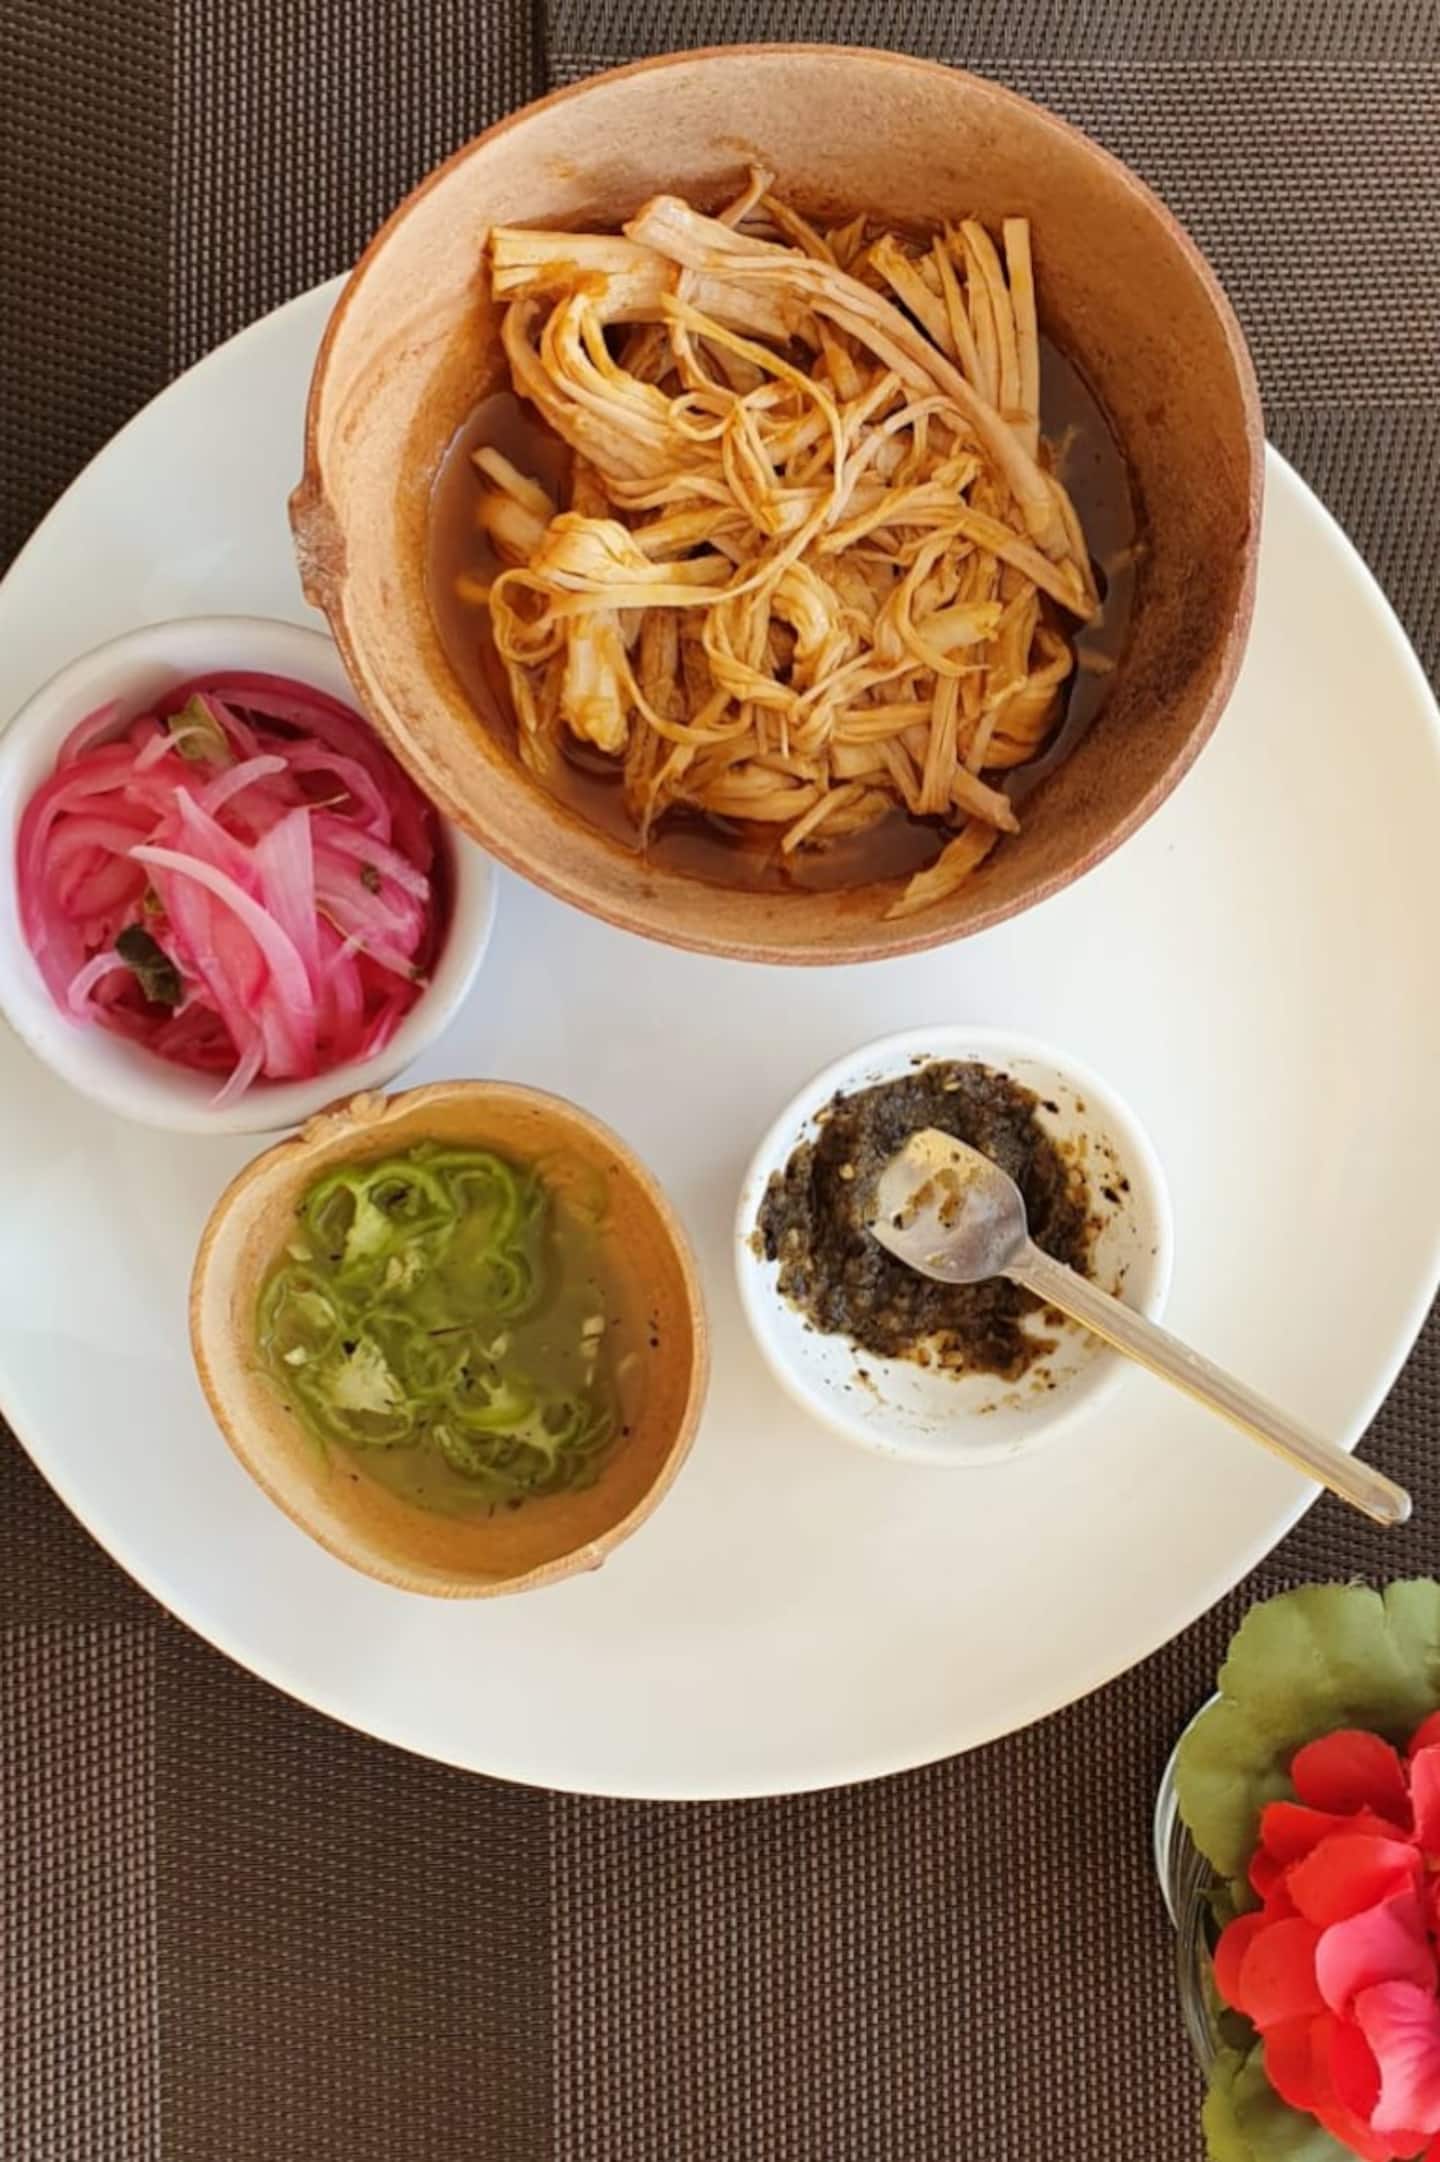 Merida tours: authentic cochinita pibil and other Yucatecan food in Merida, Mexico on a food tour